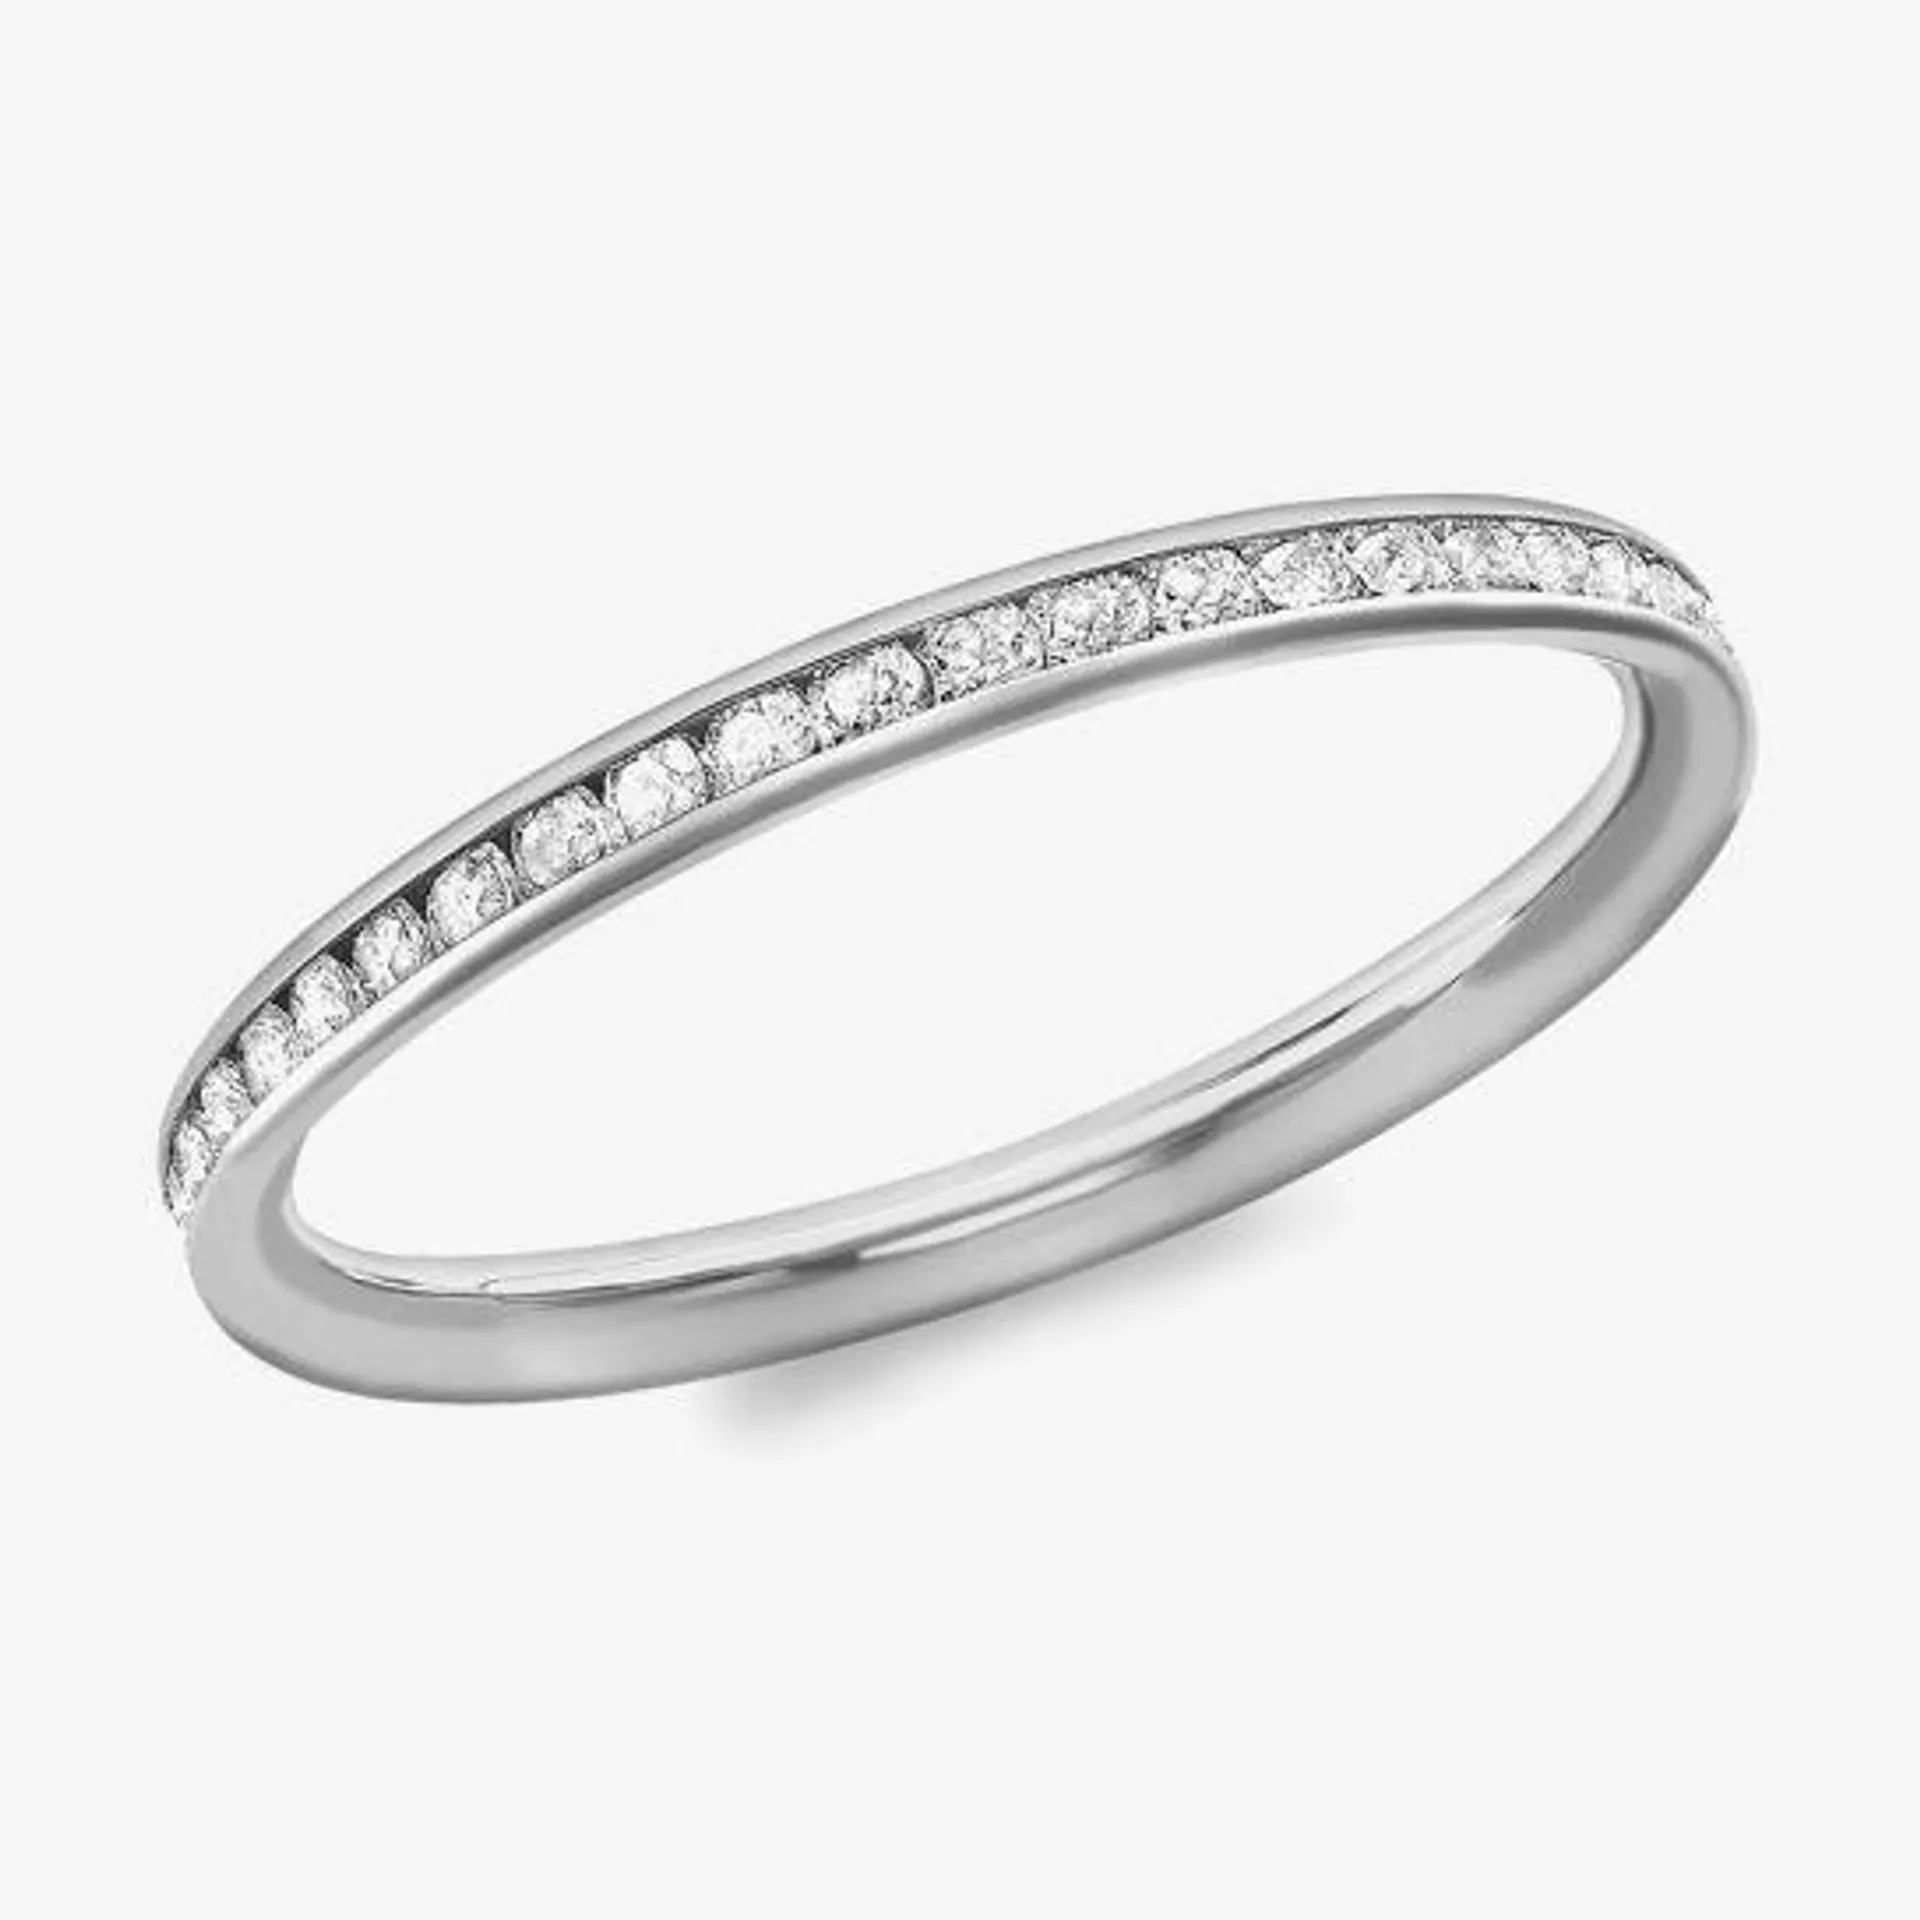 9ct White Gold 2mm Crystal-Set Eternity Ring 5.84.9069